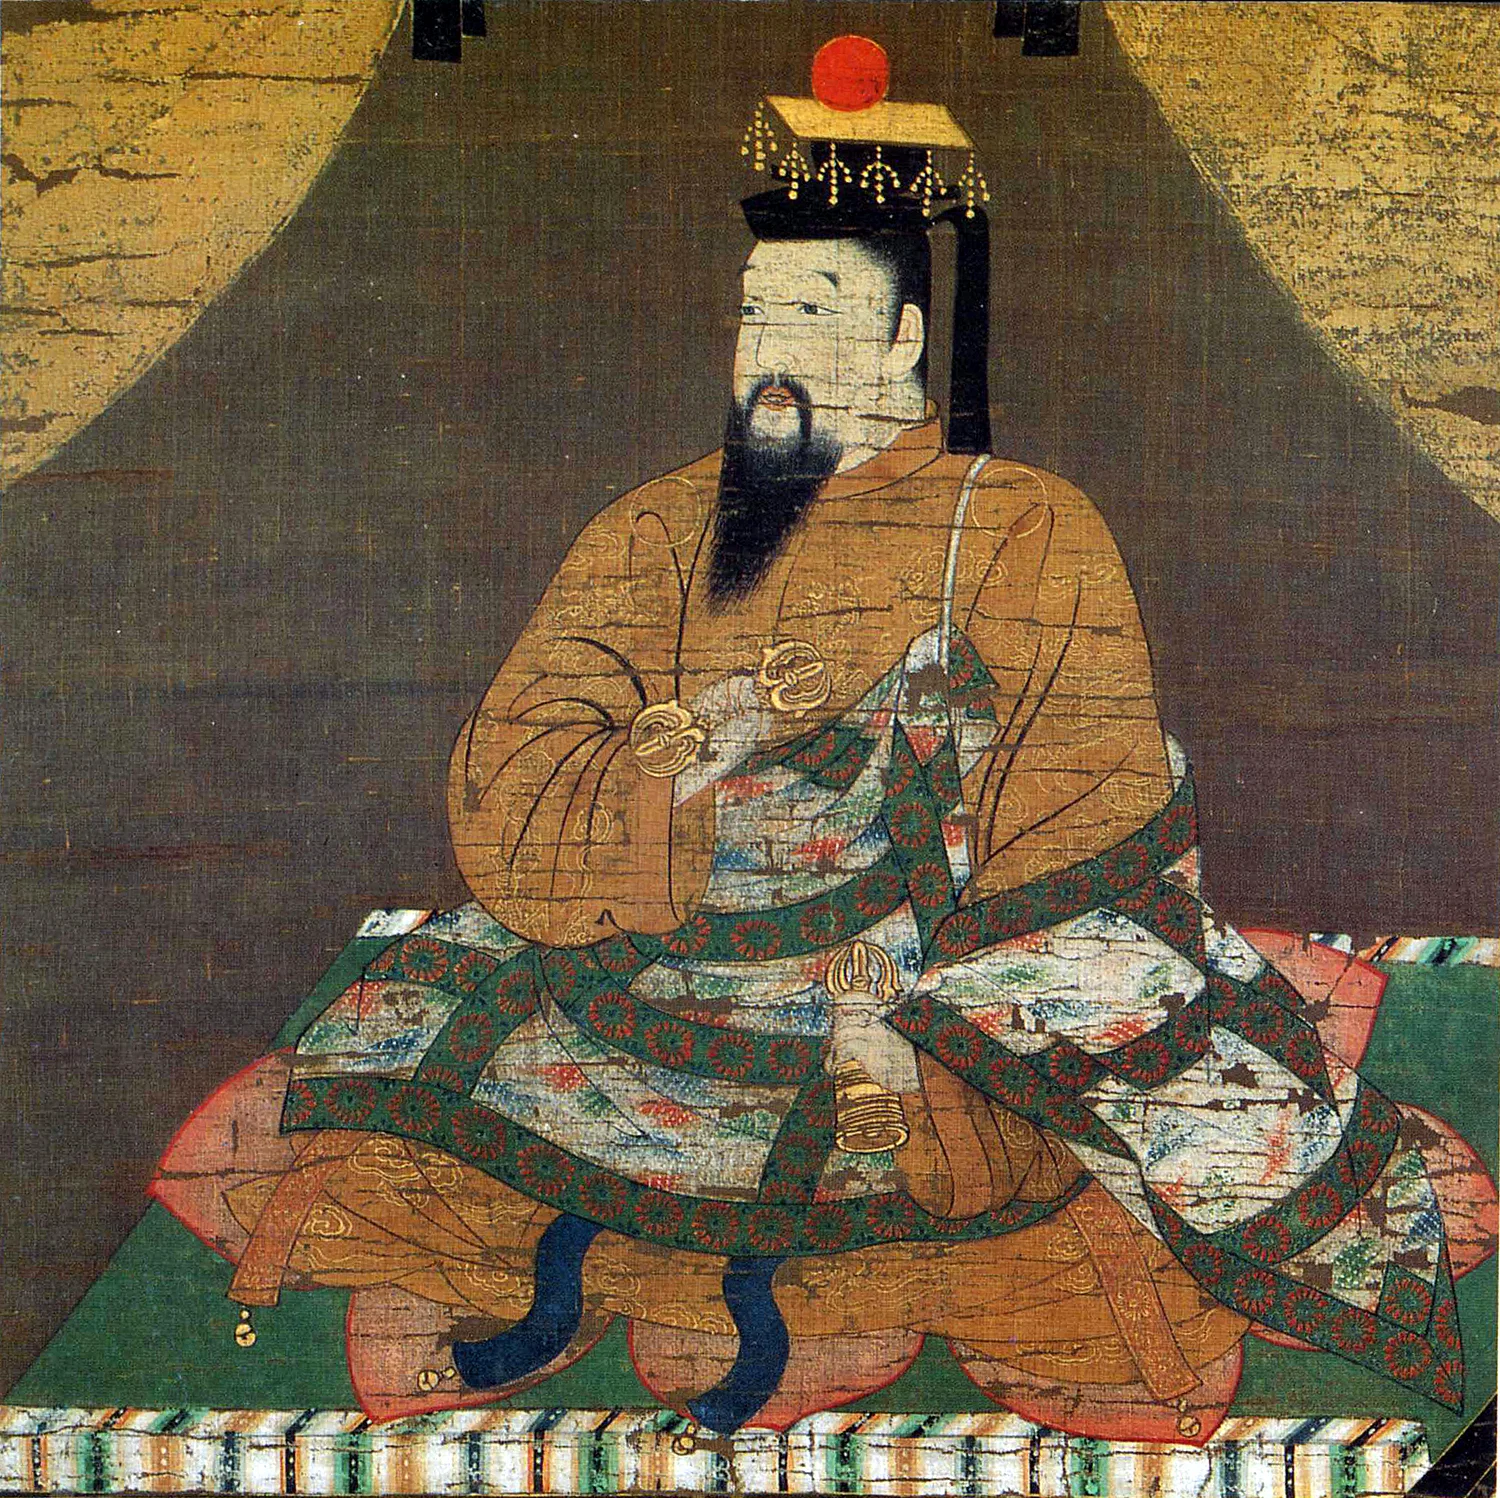 painting of a seated man on a wooden crate